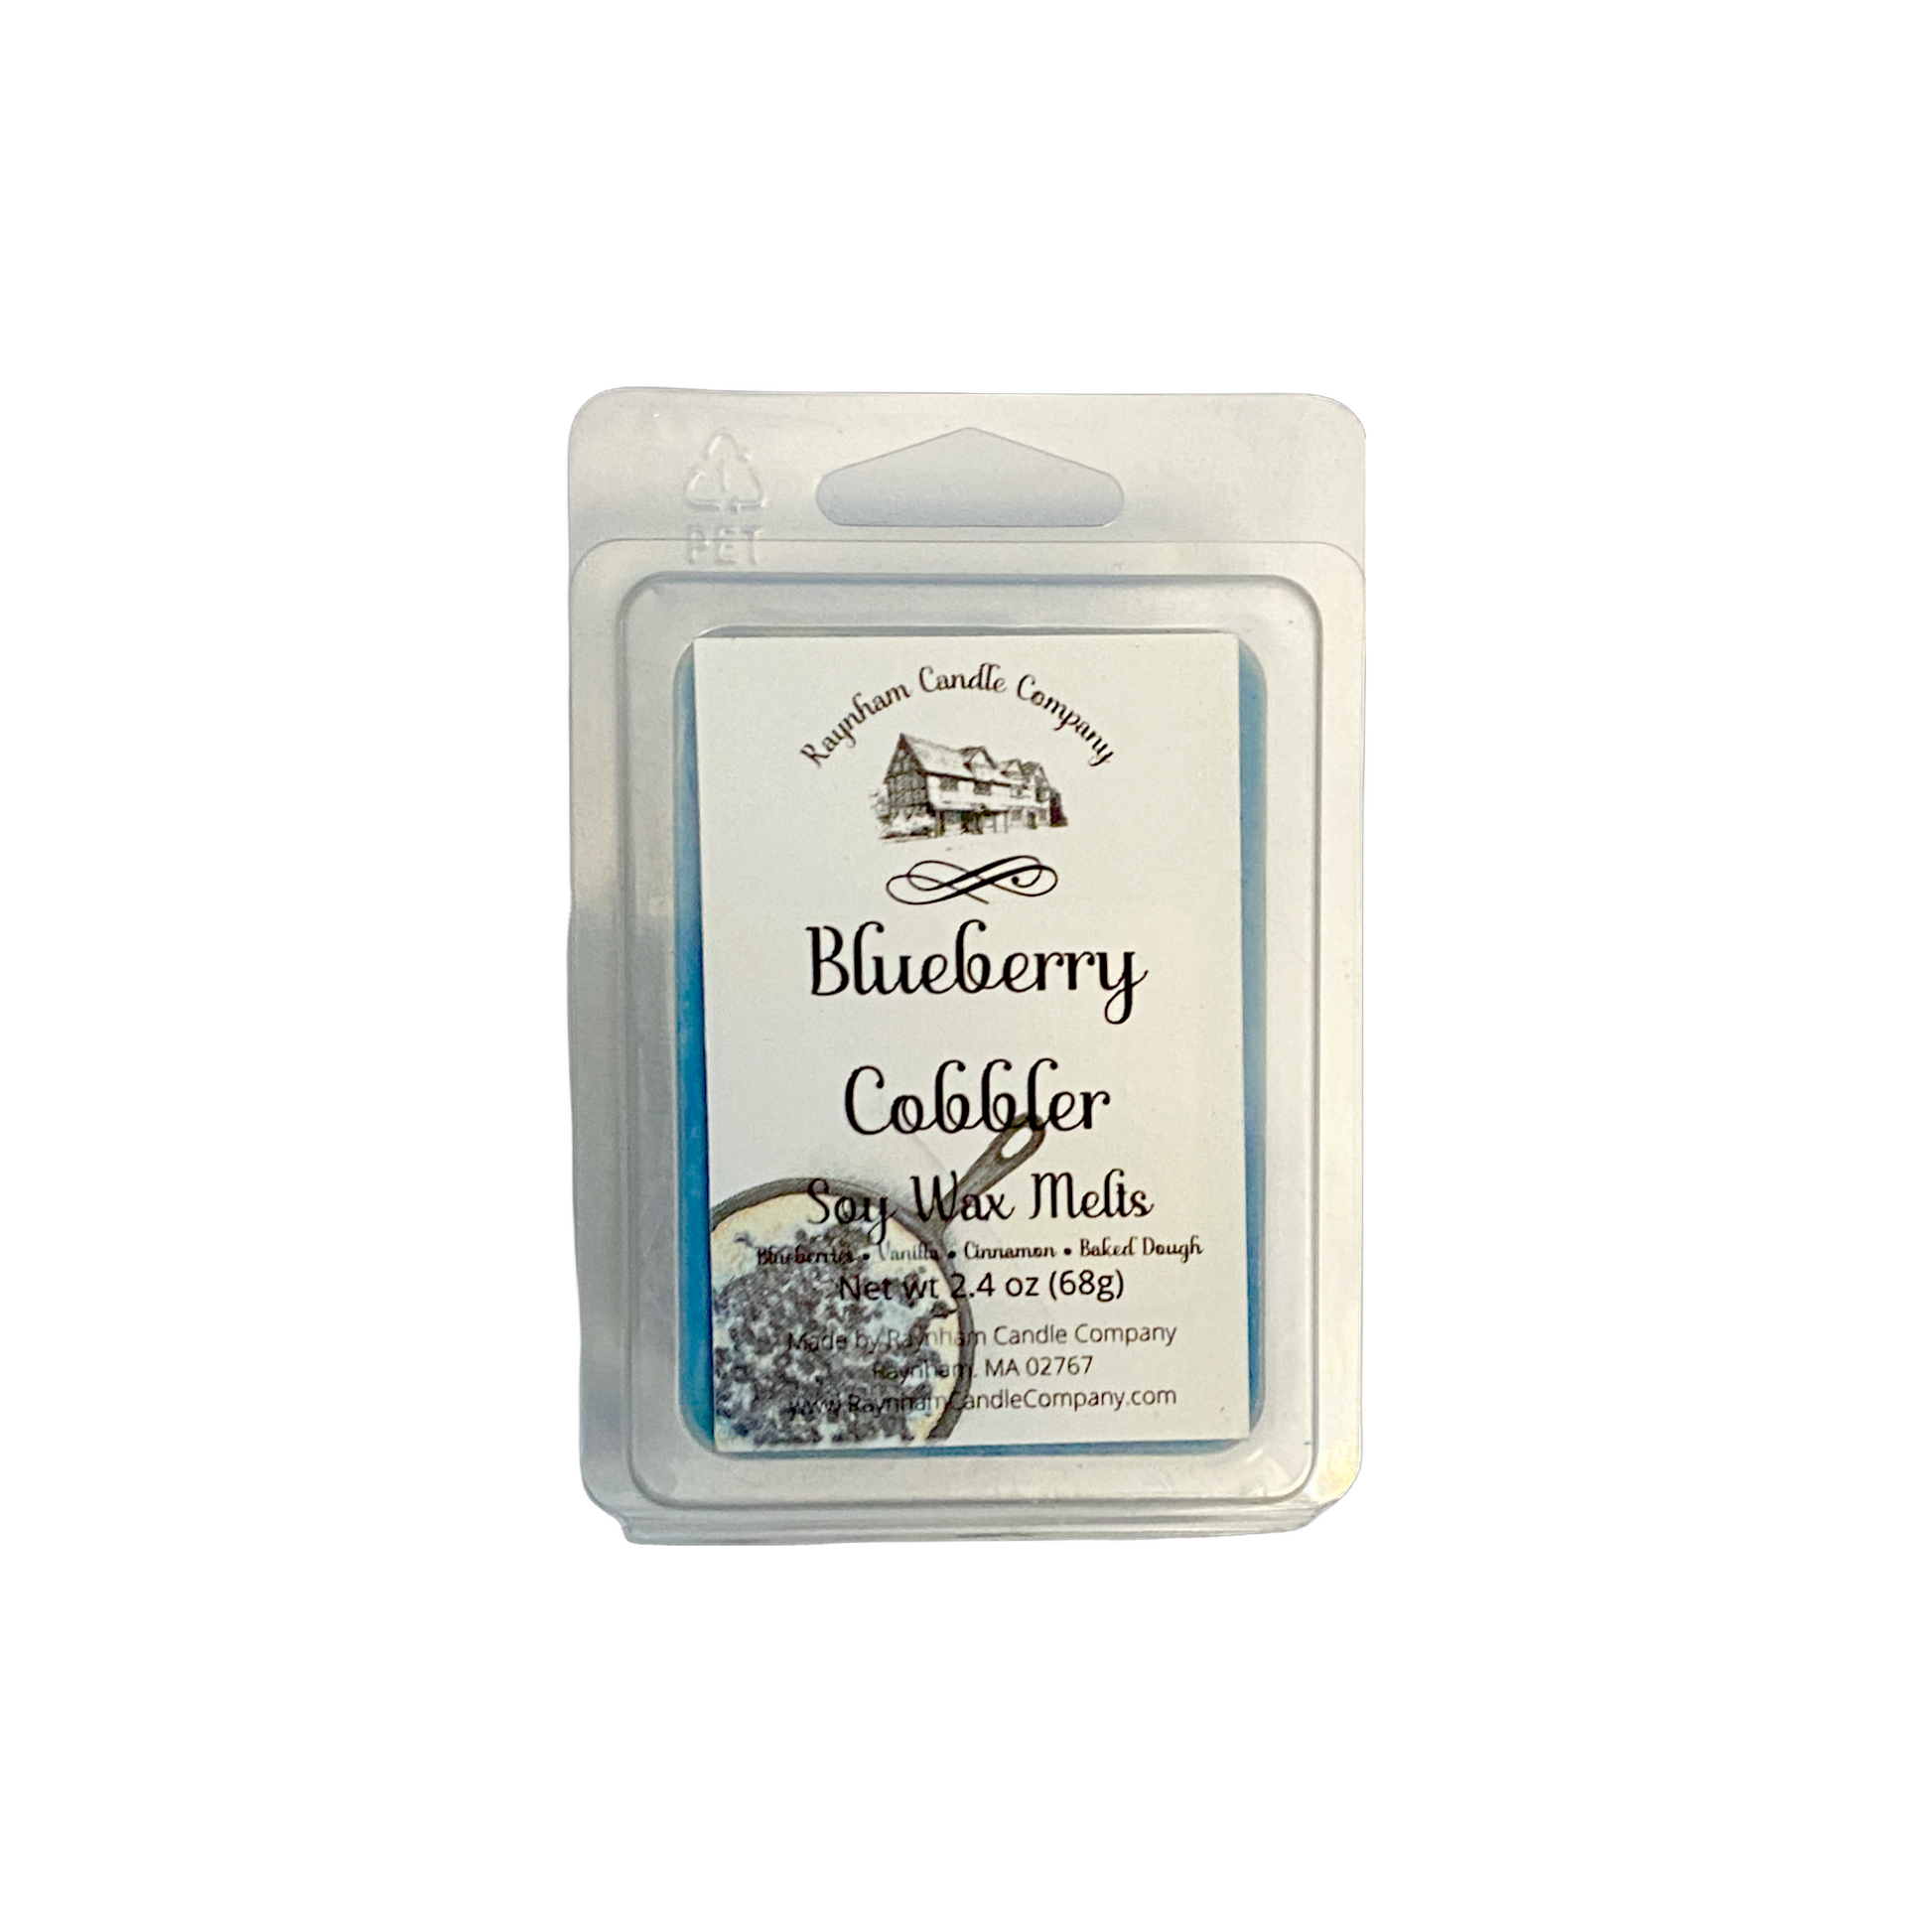 Blueberry Cobbler - Premium  from Raynham Candle Company  - Just $5.00! Shop now at Raynham Candle Company 